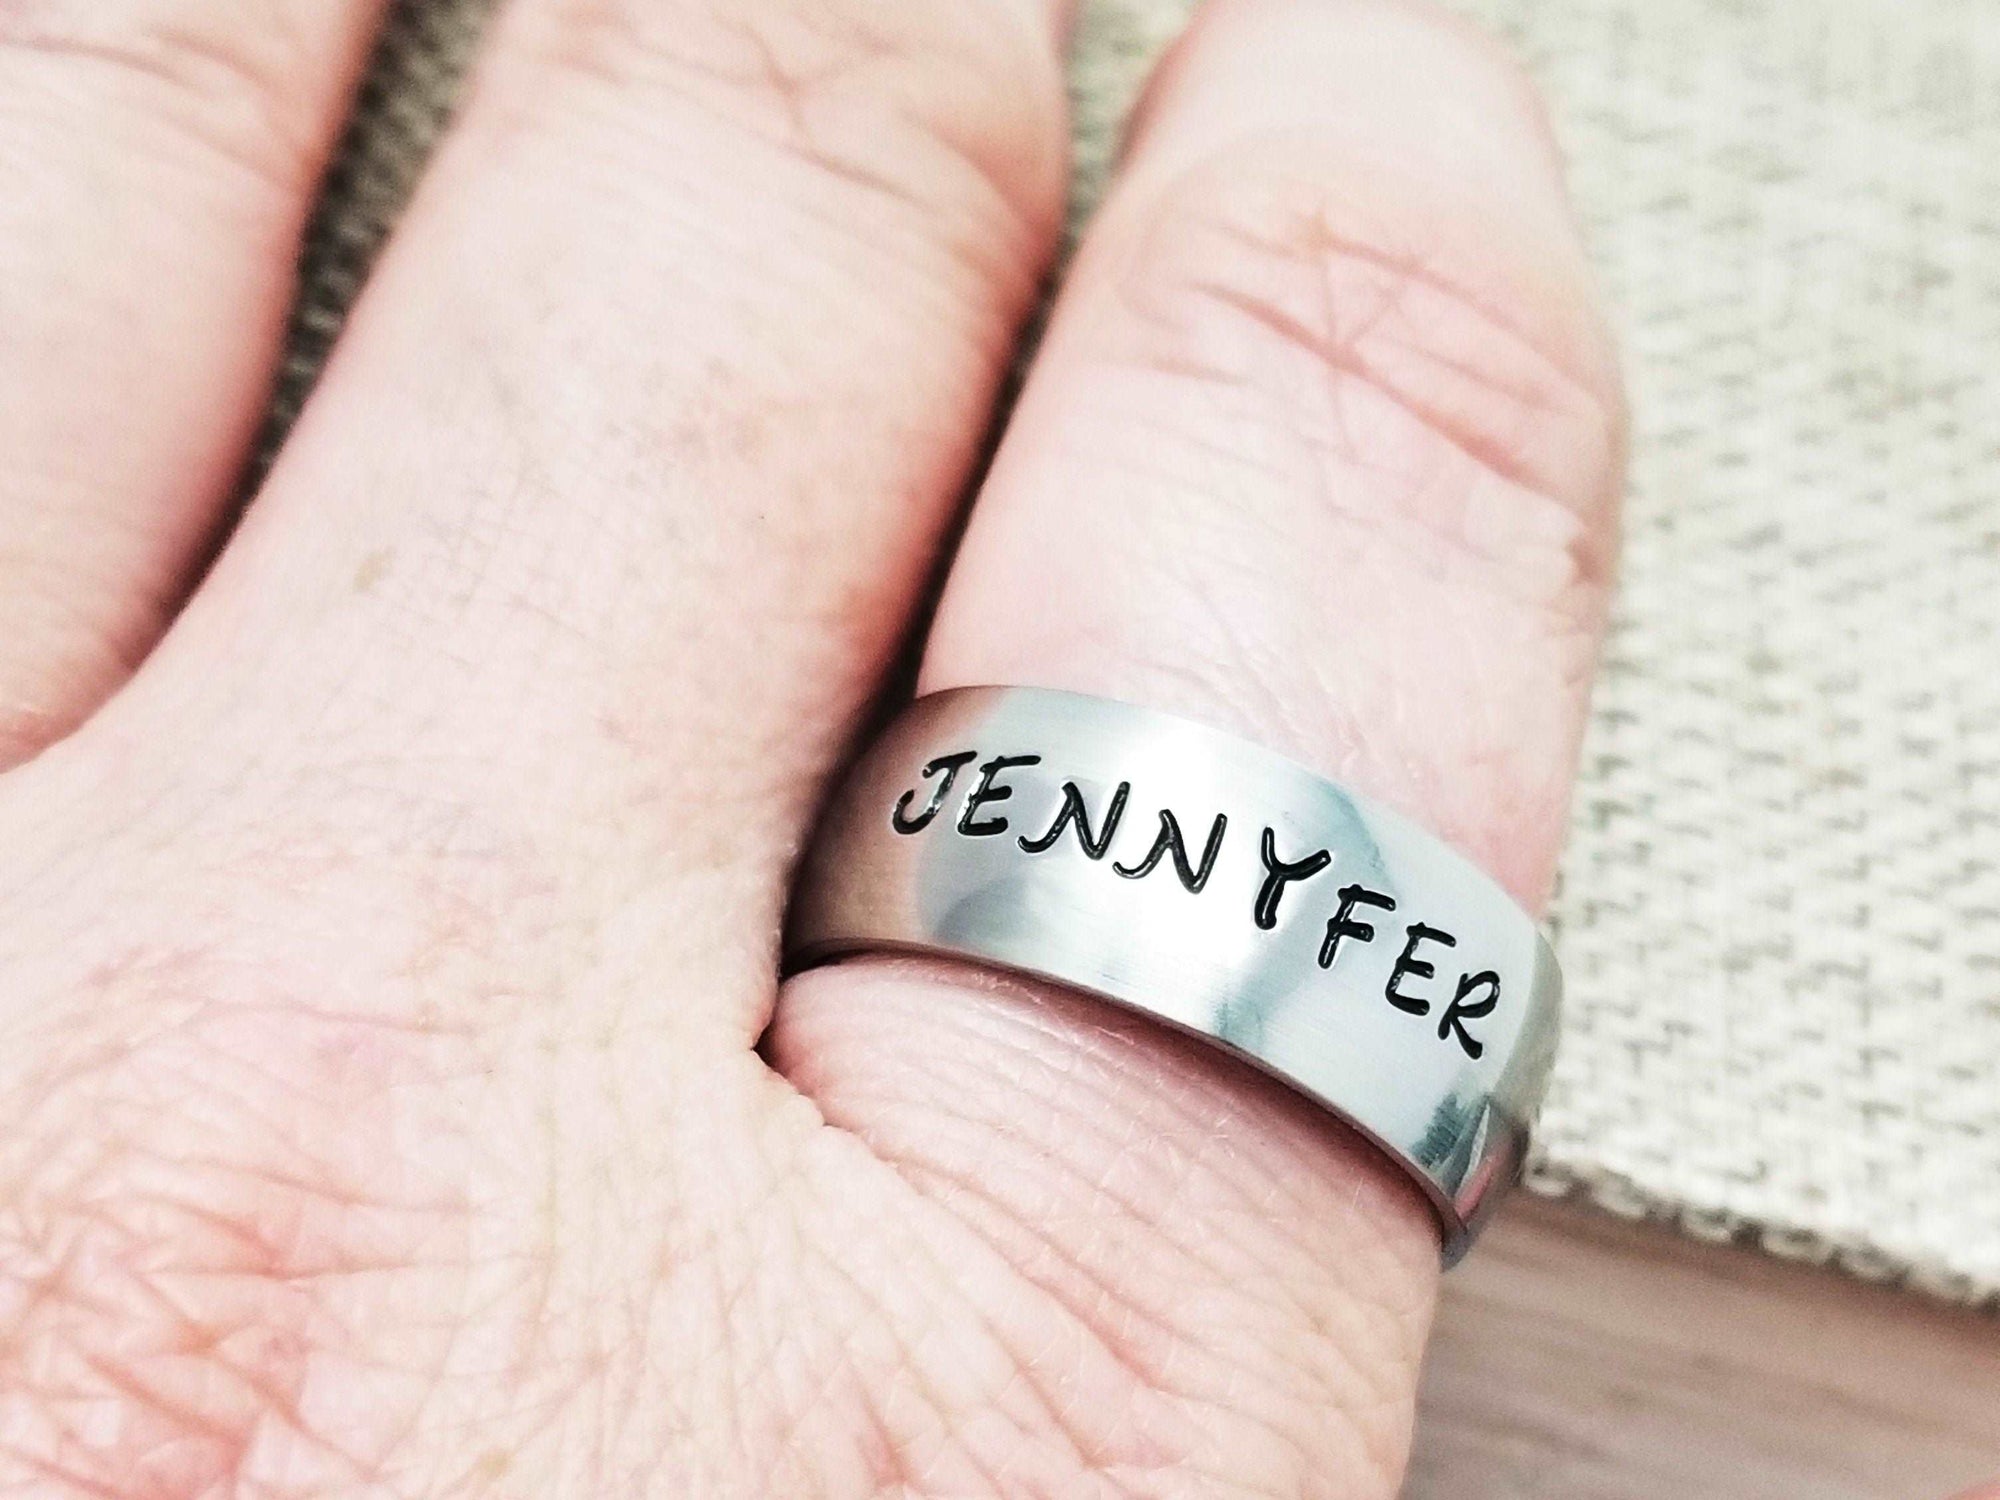 Custom Date Ring, Stainless Steel Name Ring, Custom Hand Stamped Rings, Stainless Ring, Gifts for her, Gift for him